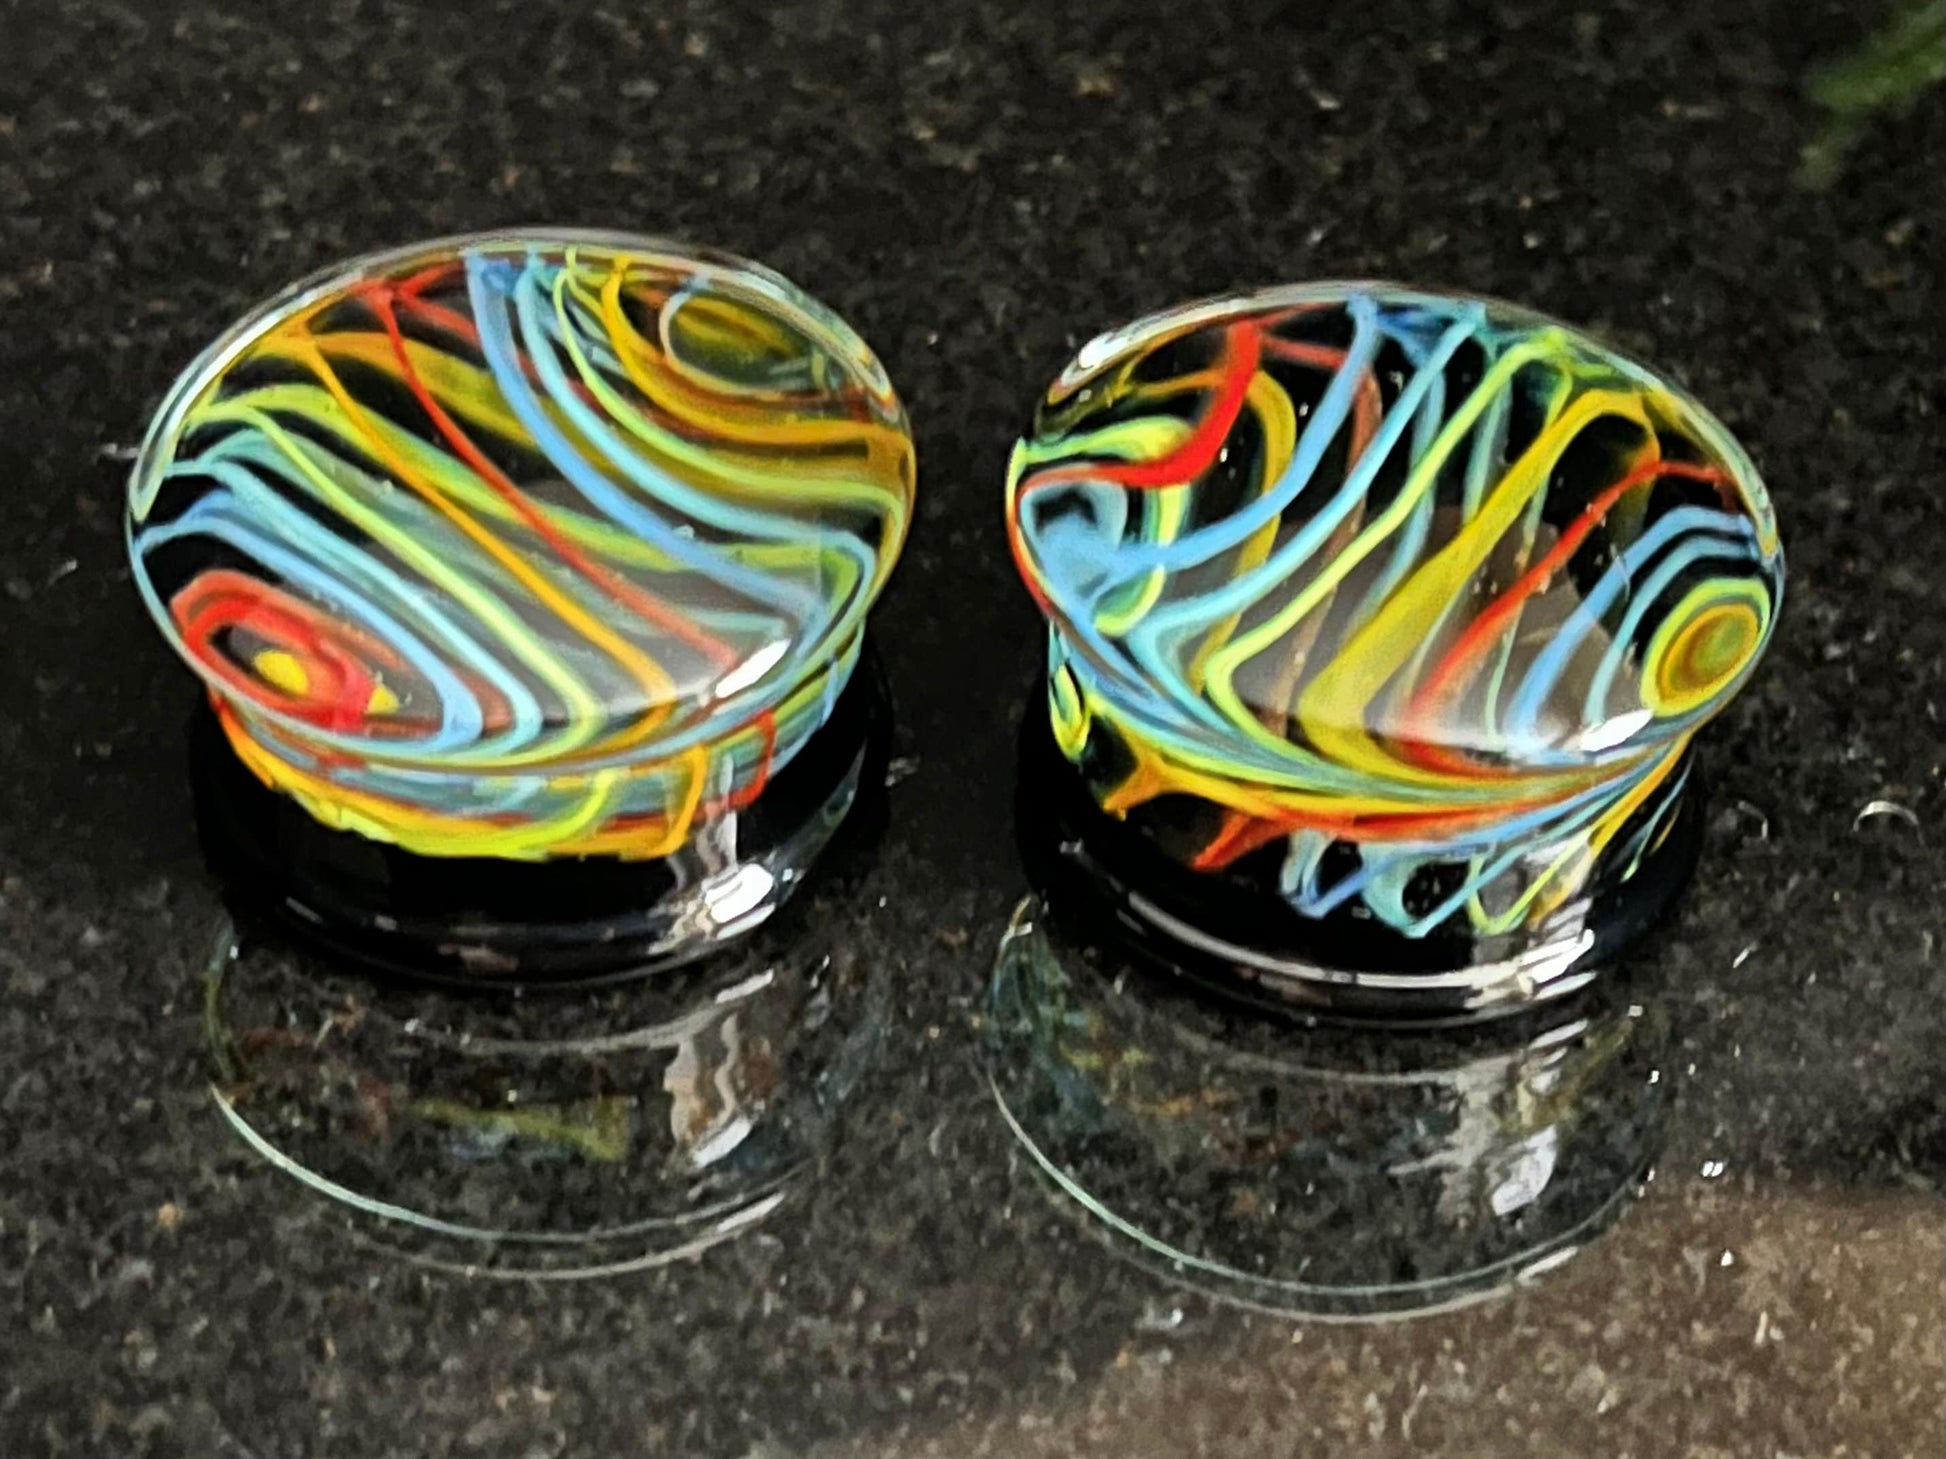 PAIR of Unique Neon Rainbow Swirls Design Double Flare Pyrex Glass Plugs - Gauges 2g (6mm) through 1" (25mm) available!